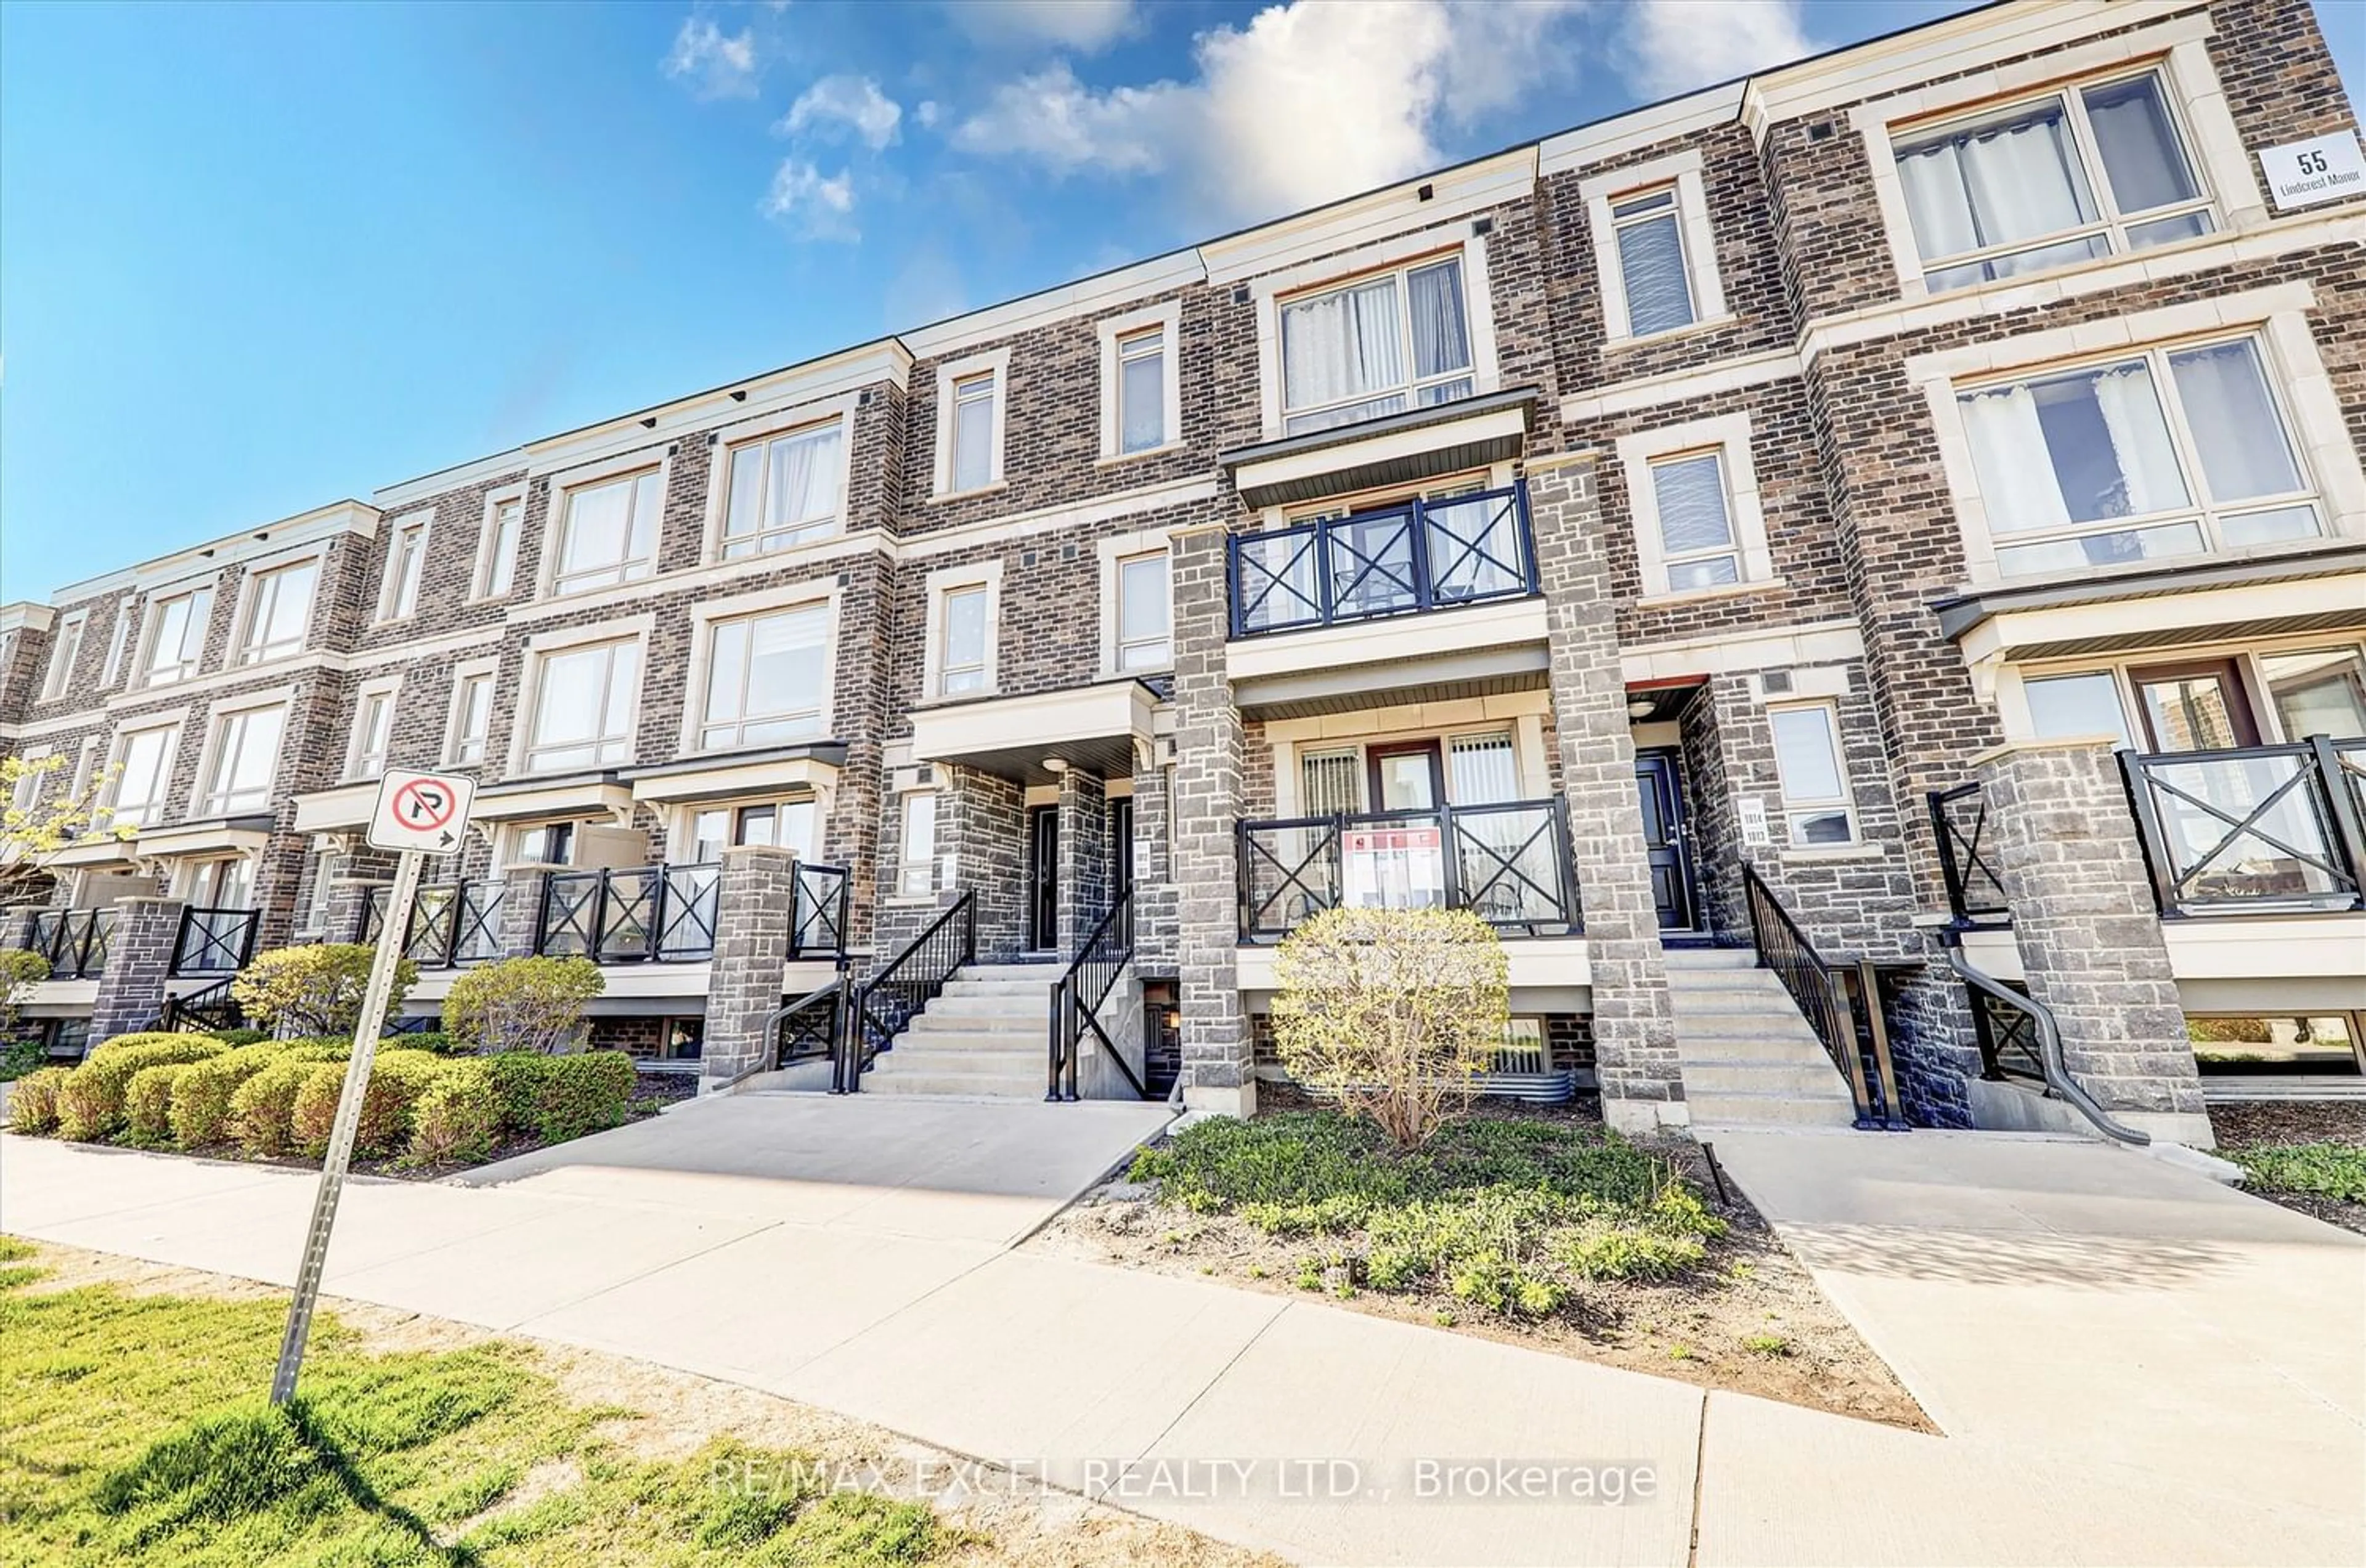 A pic from exterior of the house or condo for 55 Lindcrest Manr #1011, Markham Ontario L6B 1N3